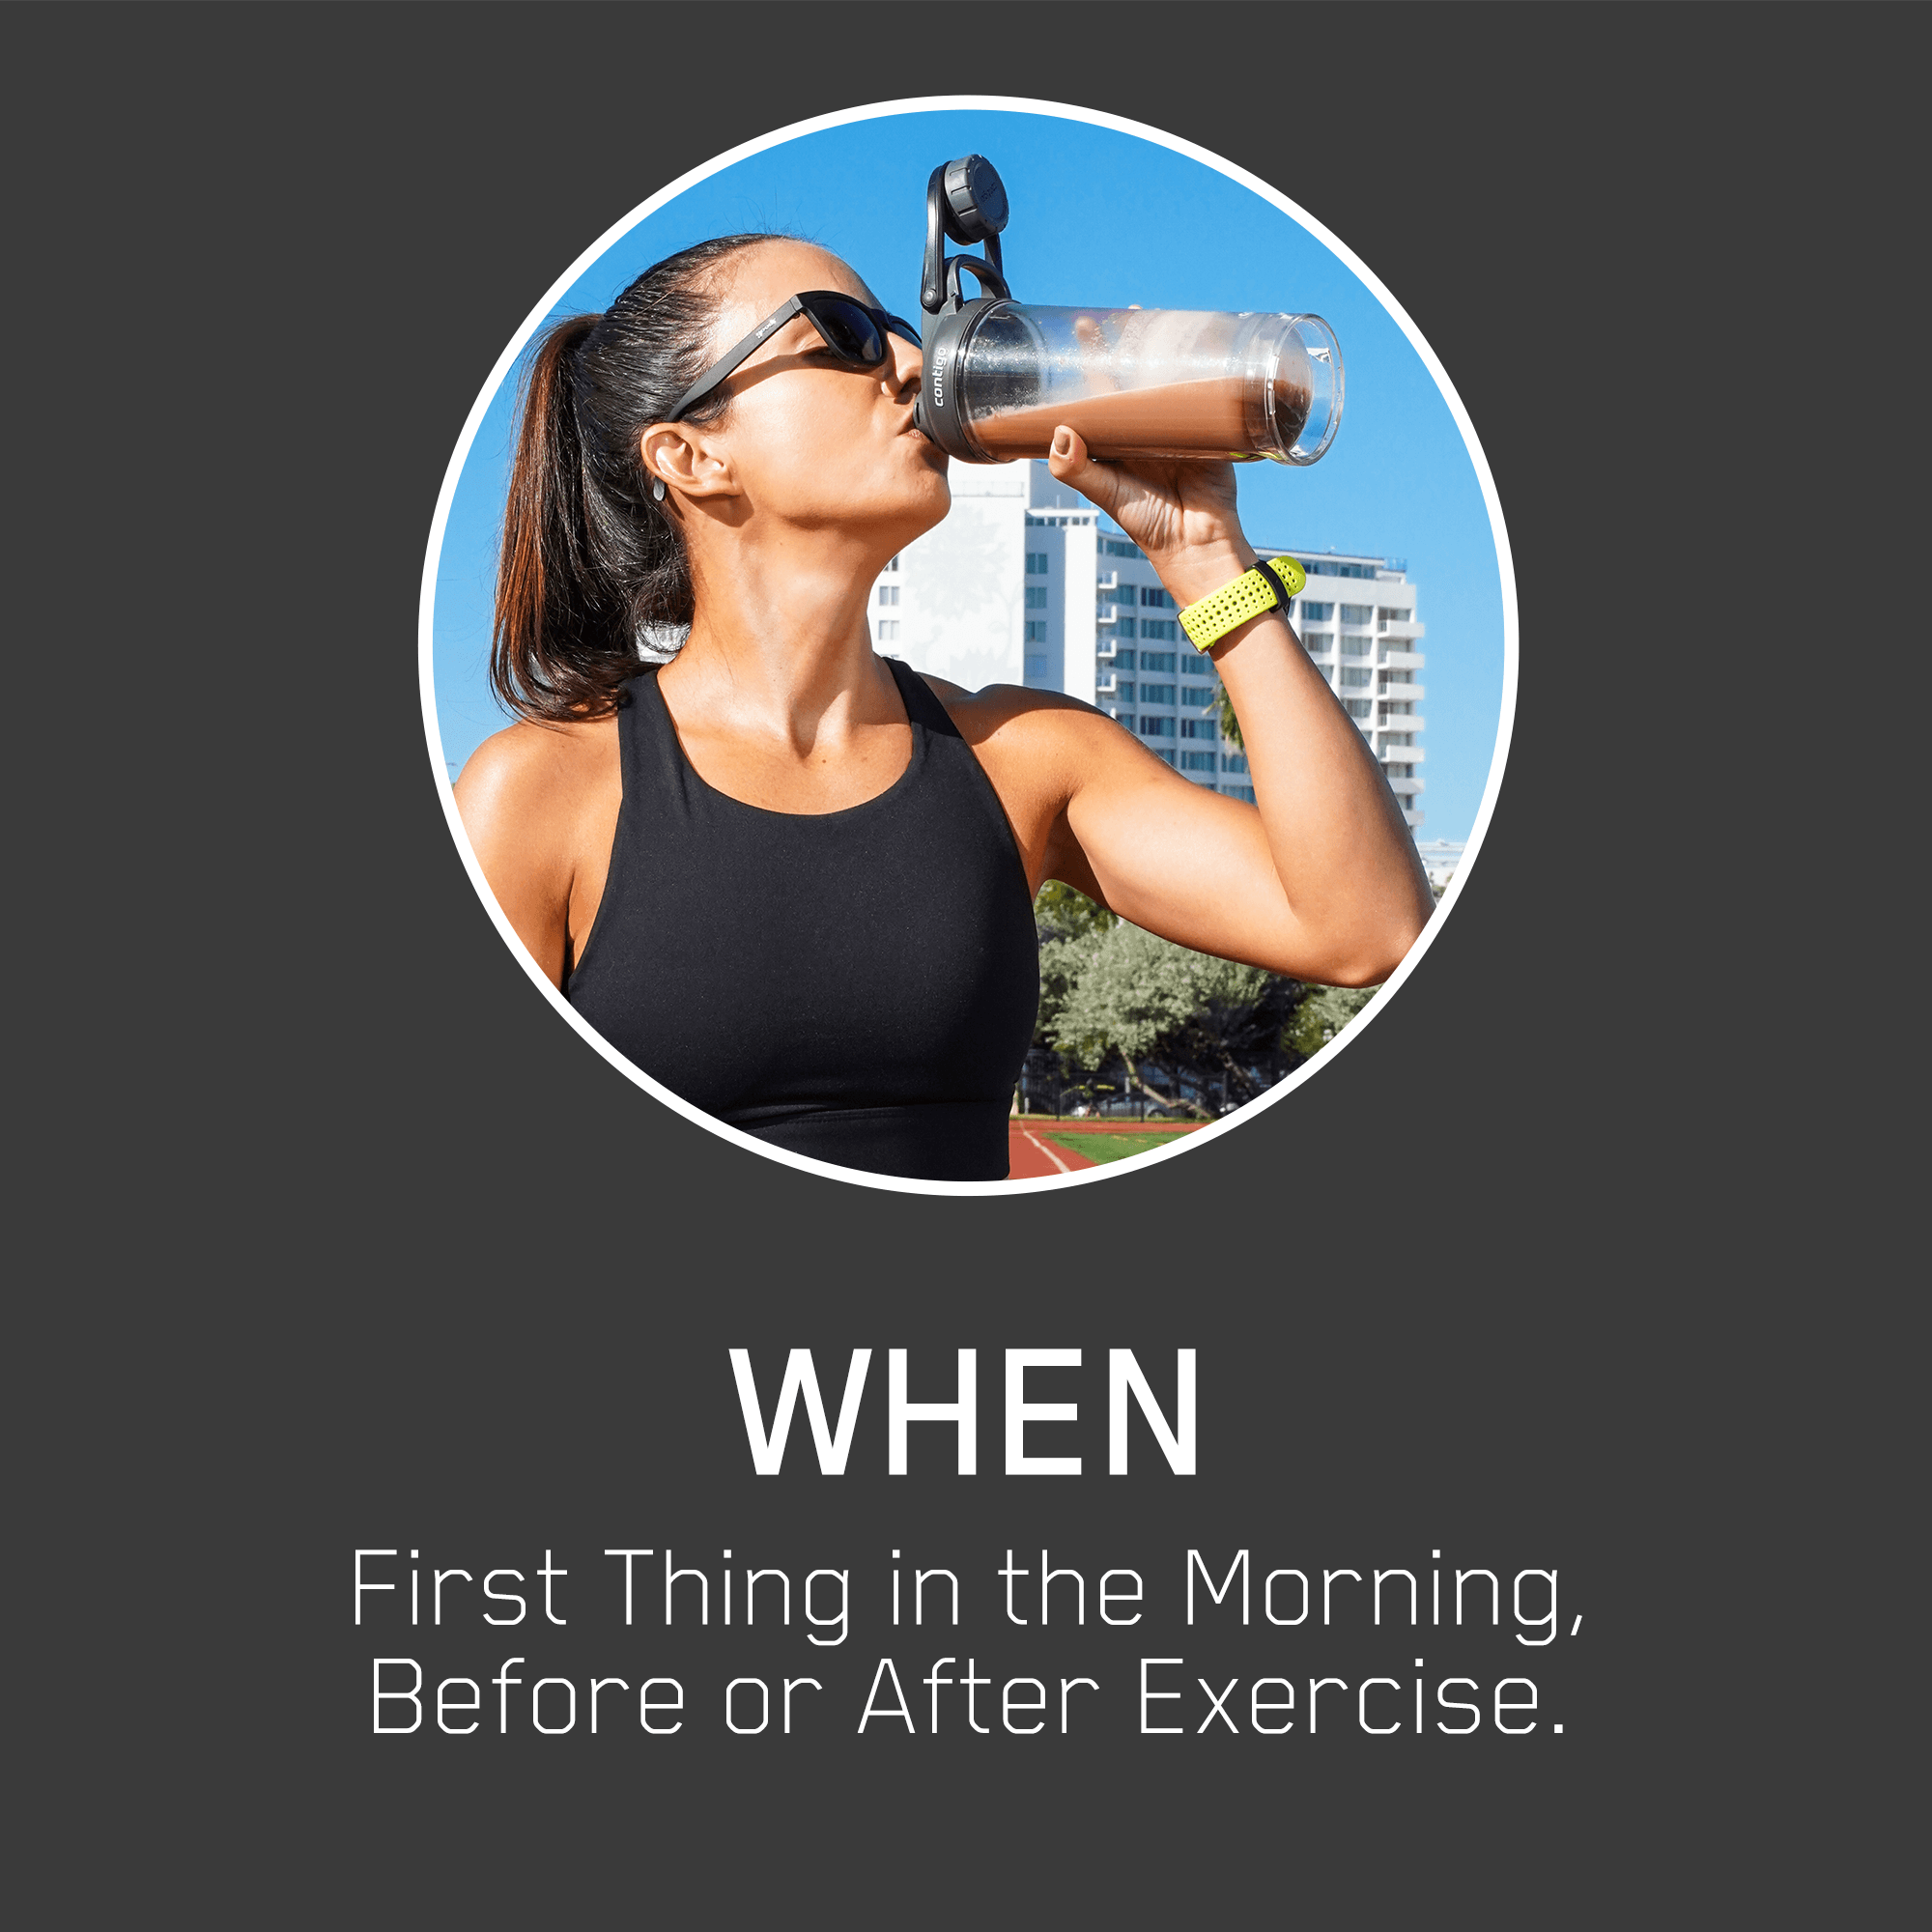 WHEN: First Thing in the Morning, Before or After Exercise.